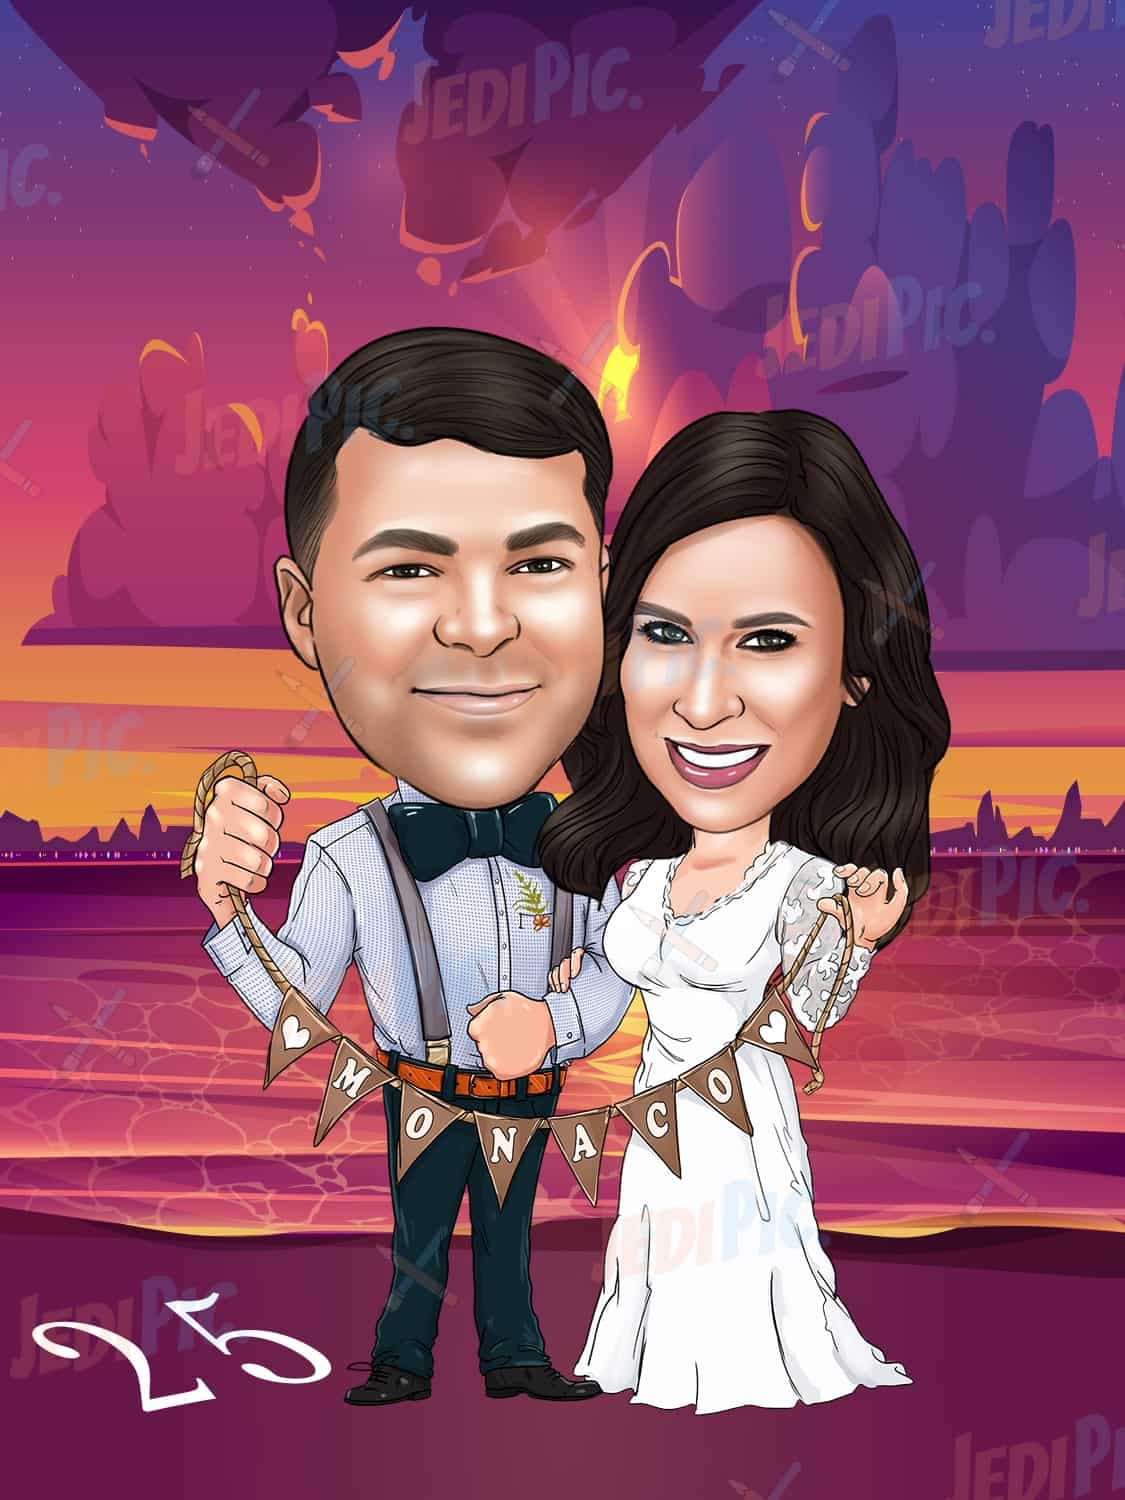 Happy Wedding Anniversary Caricature Gift for him